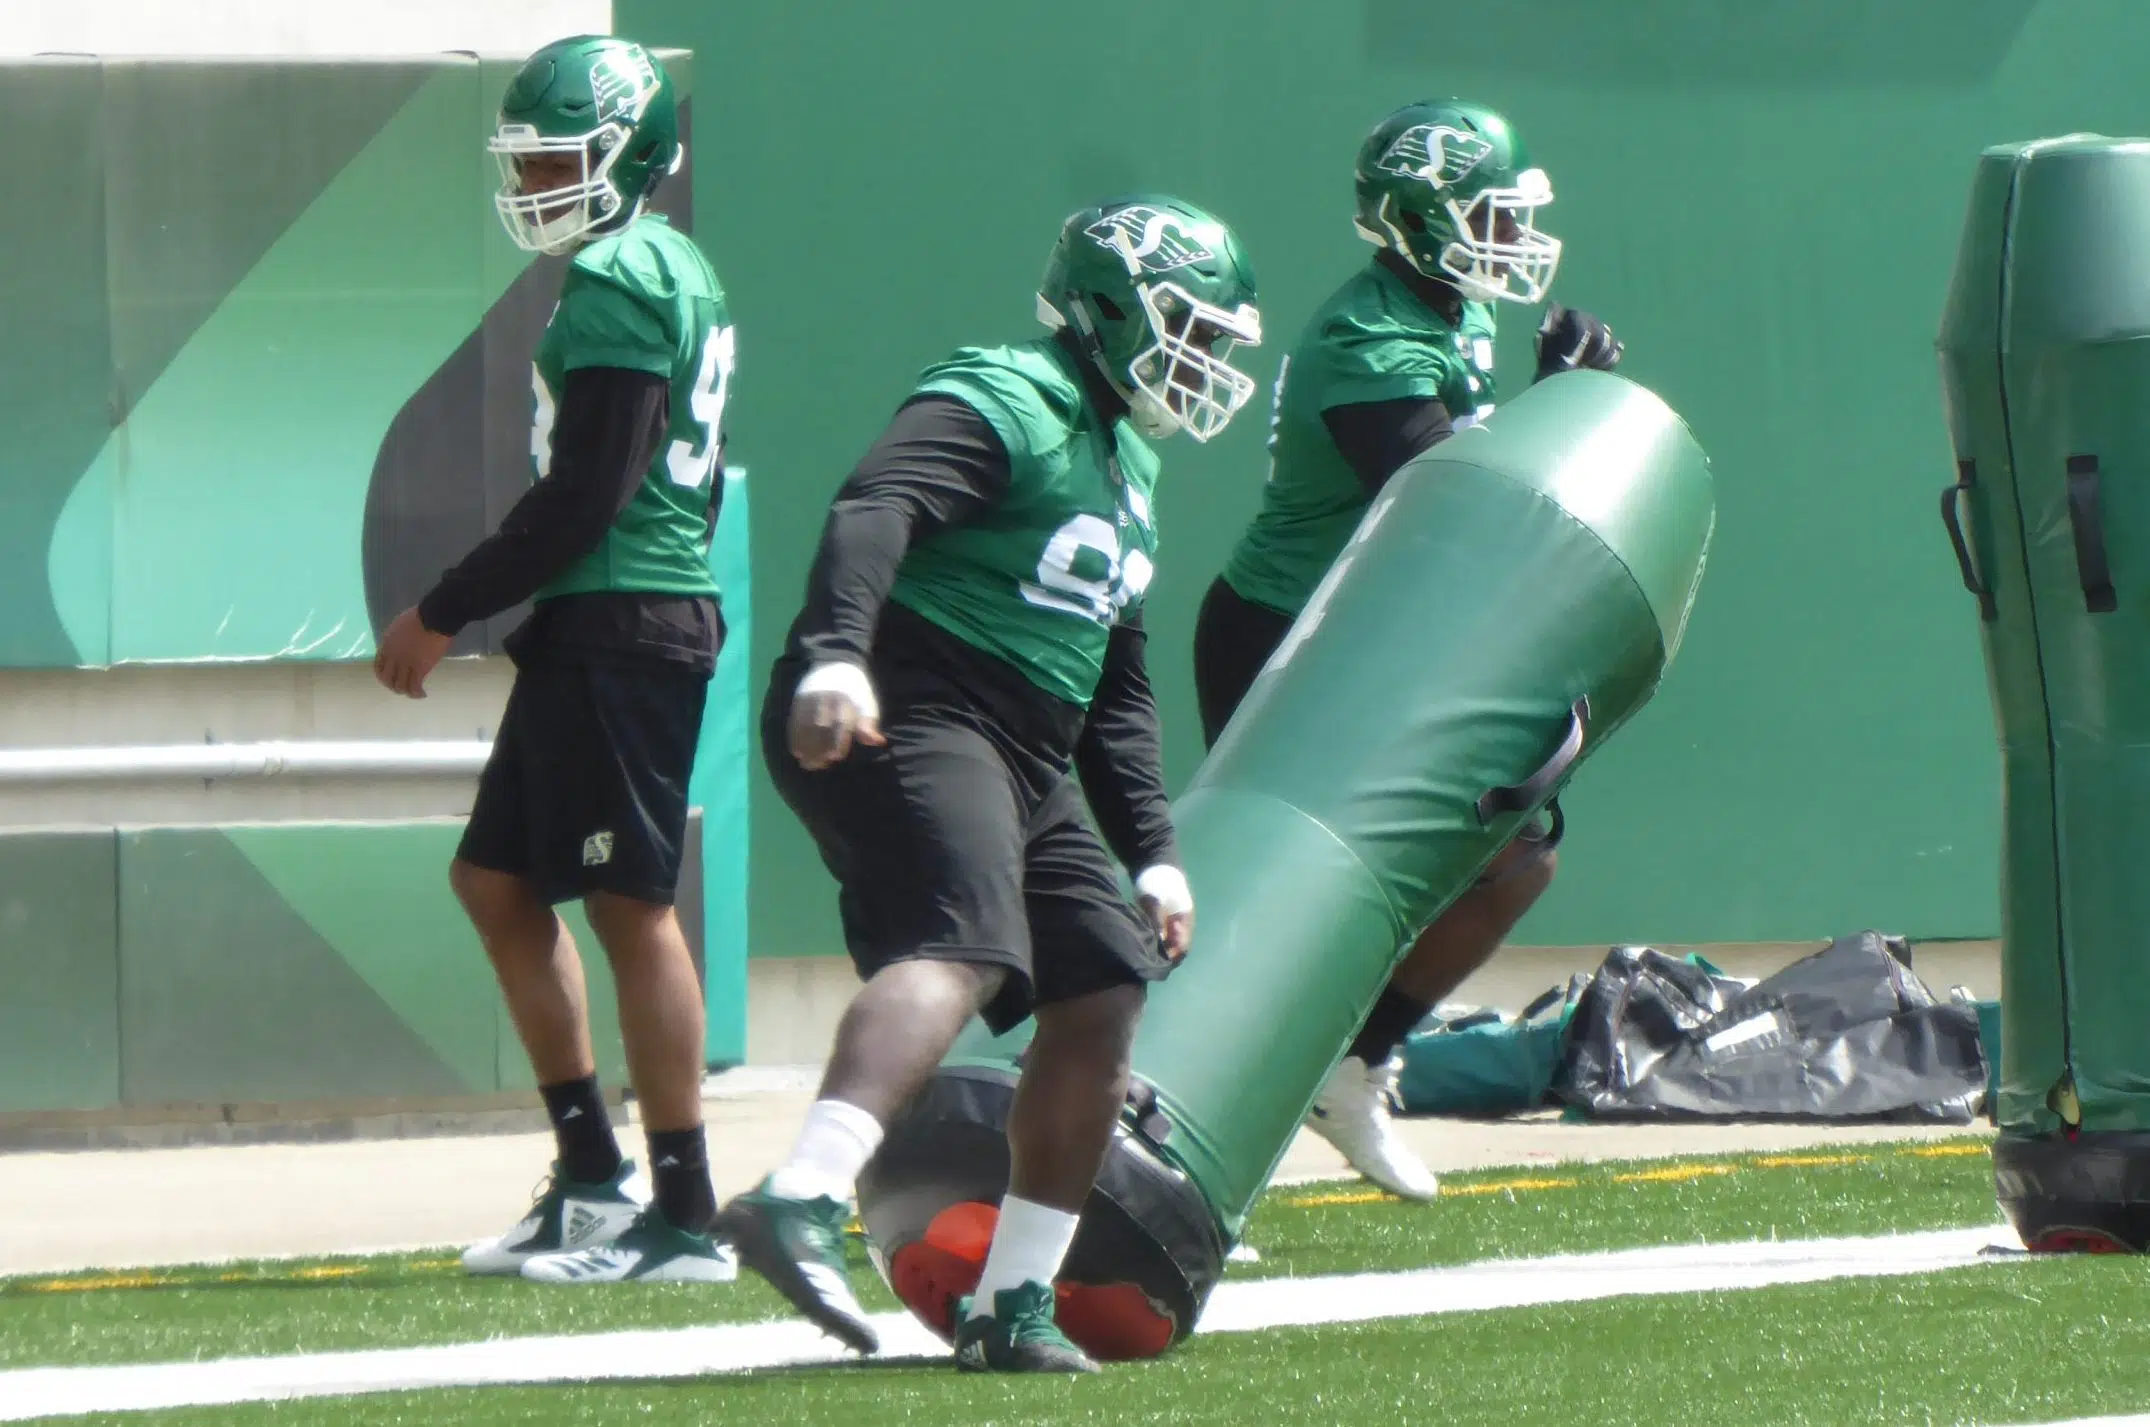 Draft pick Dabire looking to find a home with the Riders